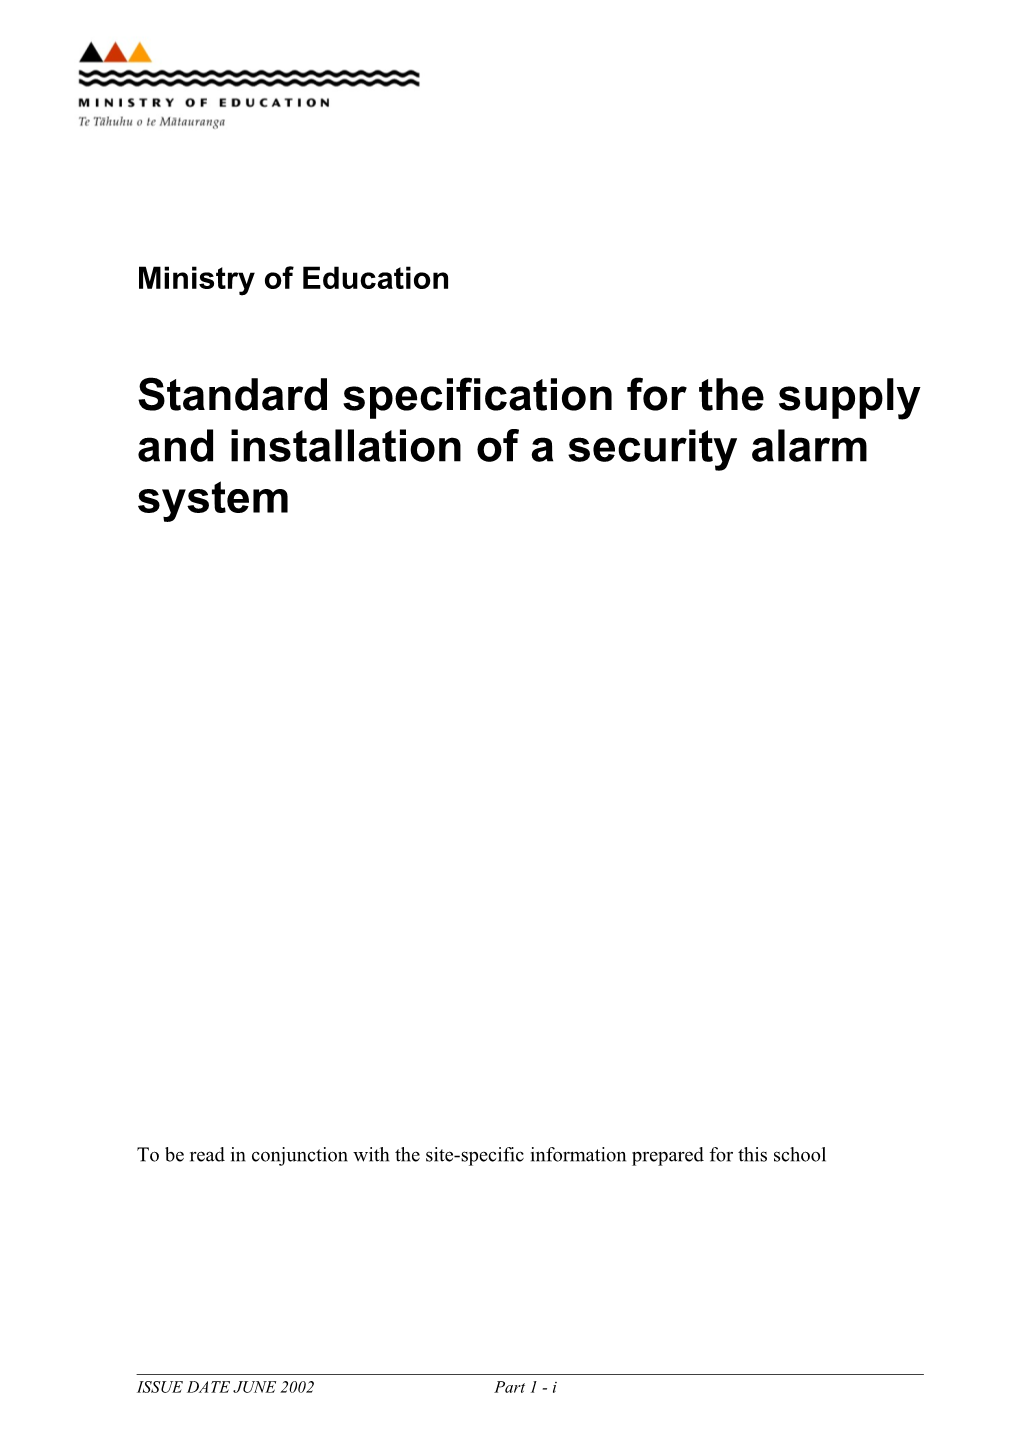 Standard Specification for the Supply and Installation of a Security System